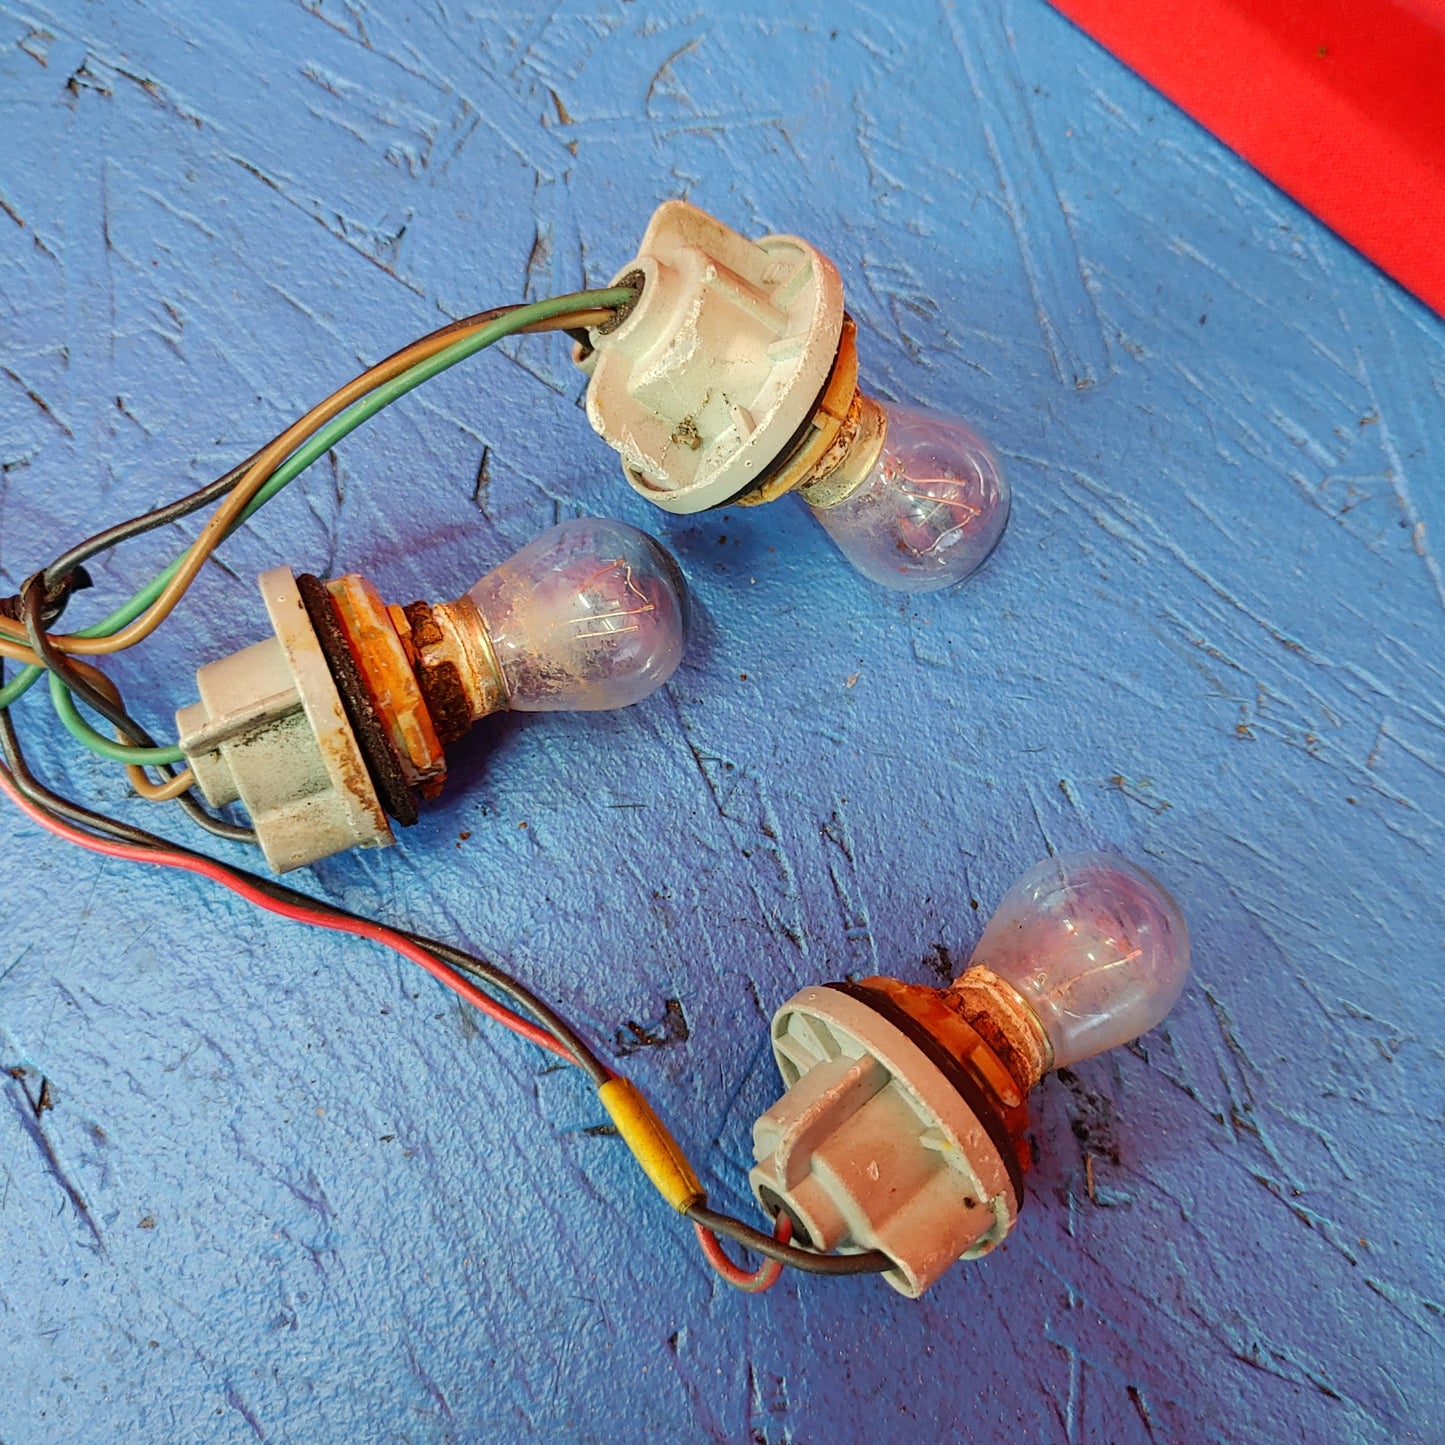 LHD, RHD (93 Red) BULBS SEIZED Taillight Harness Pair for Wiring and Grommet   RX7 FD FD3S 93 - 02 Mazda S5B25/17